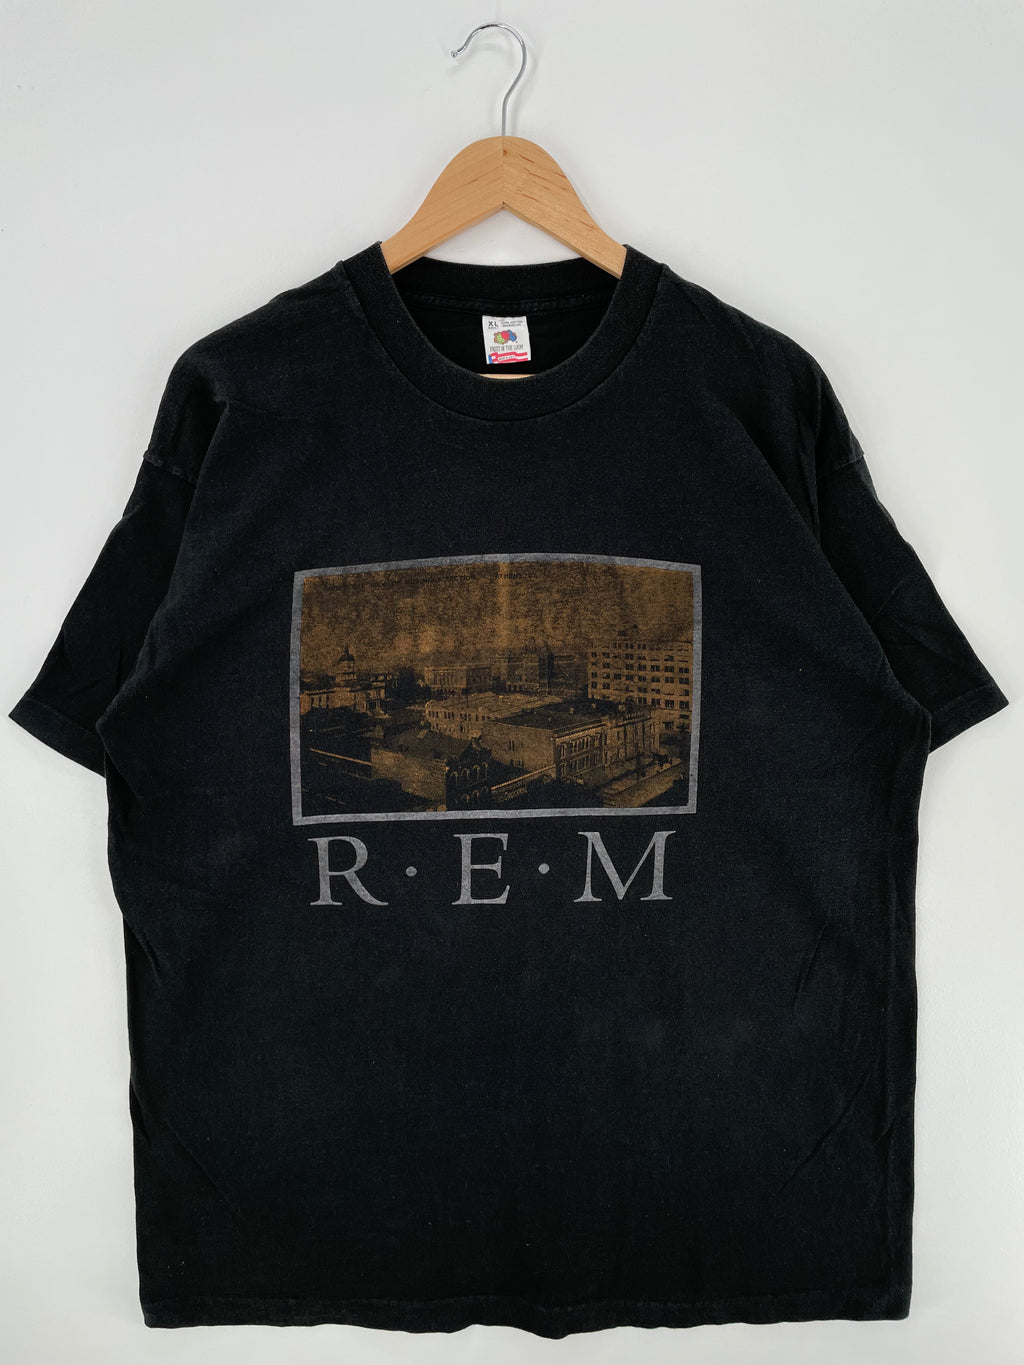 90's REM Made in USA Size XL Music T-shirts / Y481